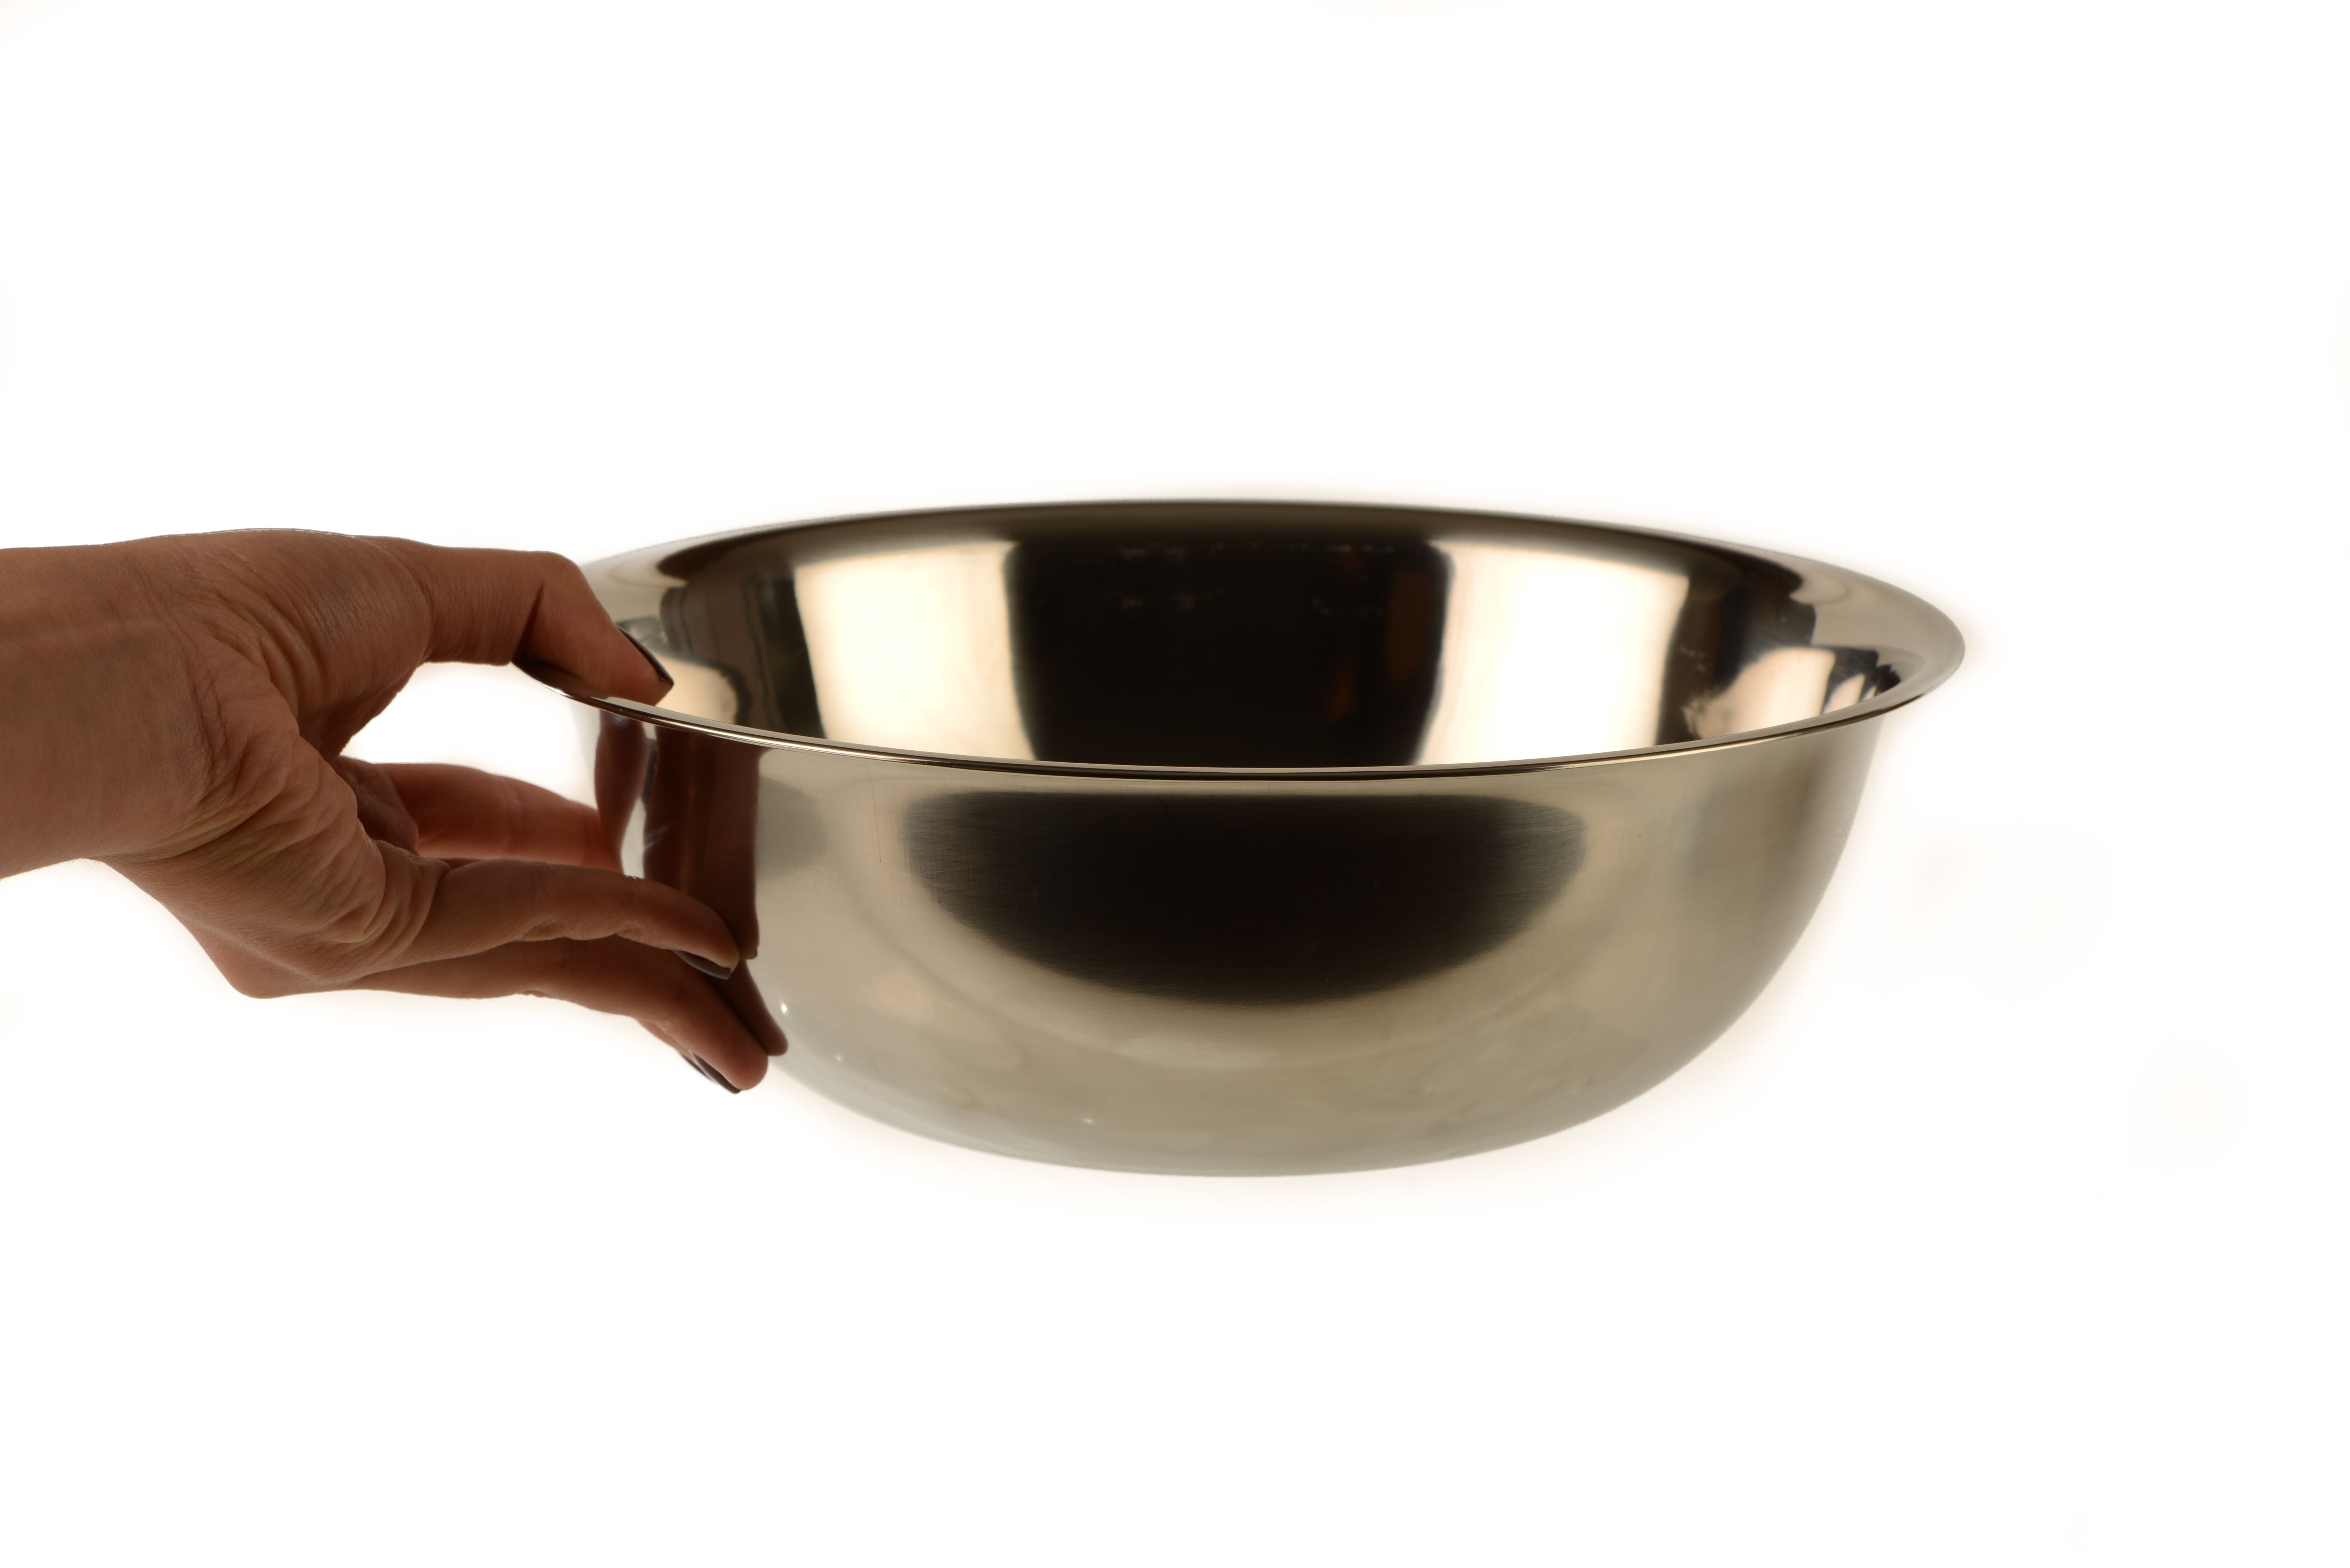 Stainless Steel Mixing Bowl - 18/8 Stainless Steel, Extra Wide Lip,  Weighted Design, Flat Bottom with High Sides, Dishwasher Safe, 12 Quarts